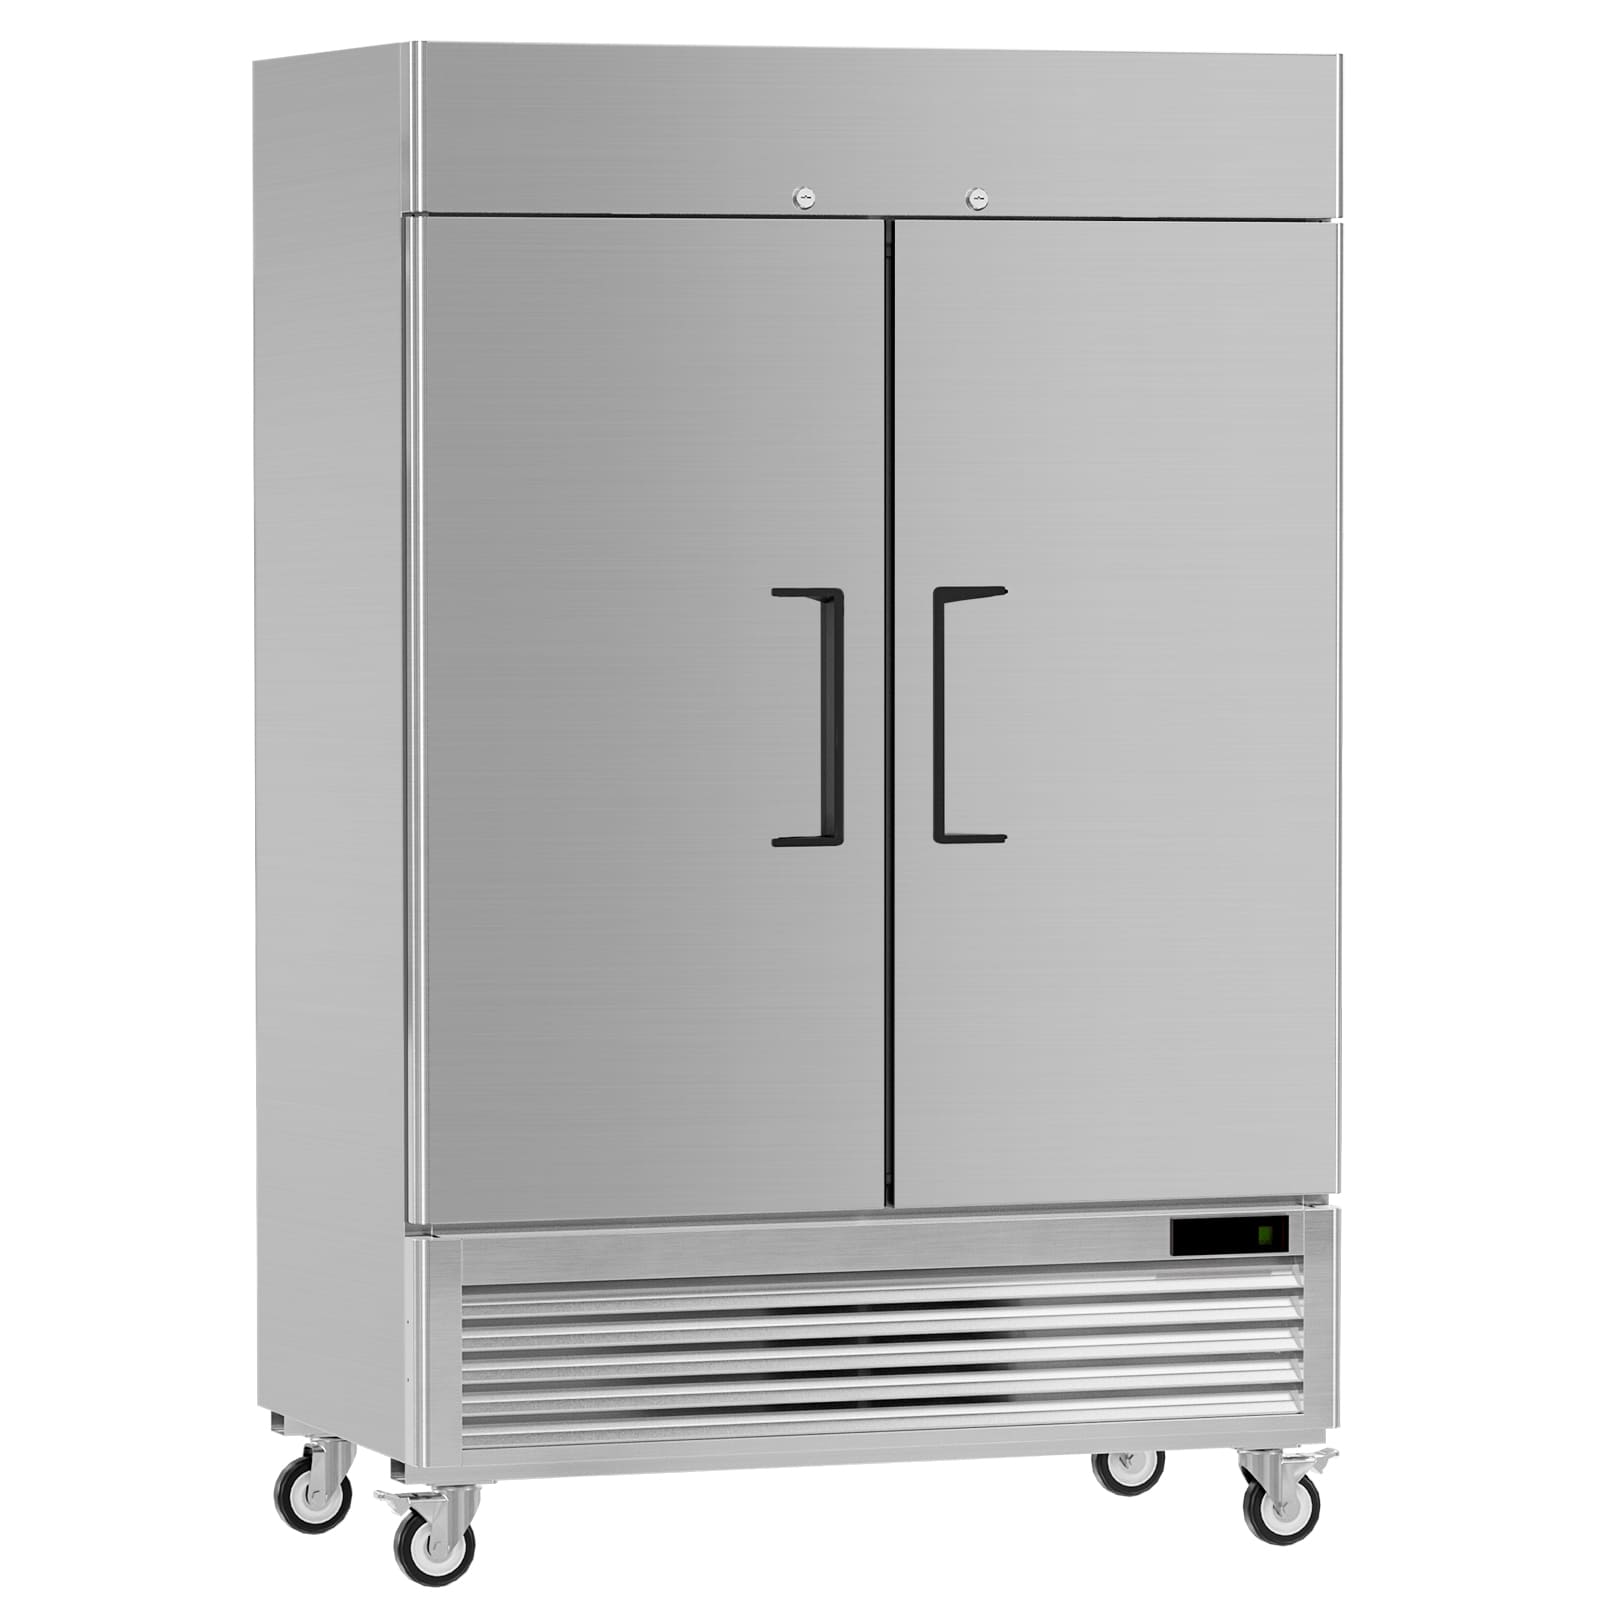 COTLIN 26 200LBS/24H Air Cooled Freestanding Stainless Steel Undercou